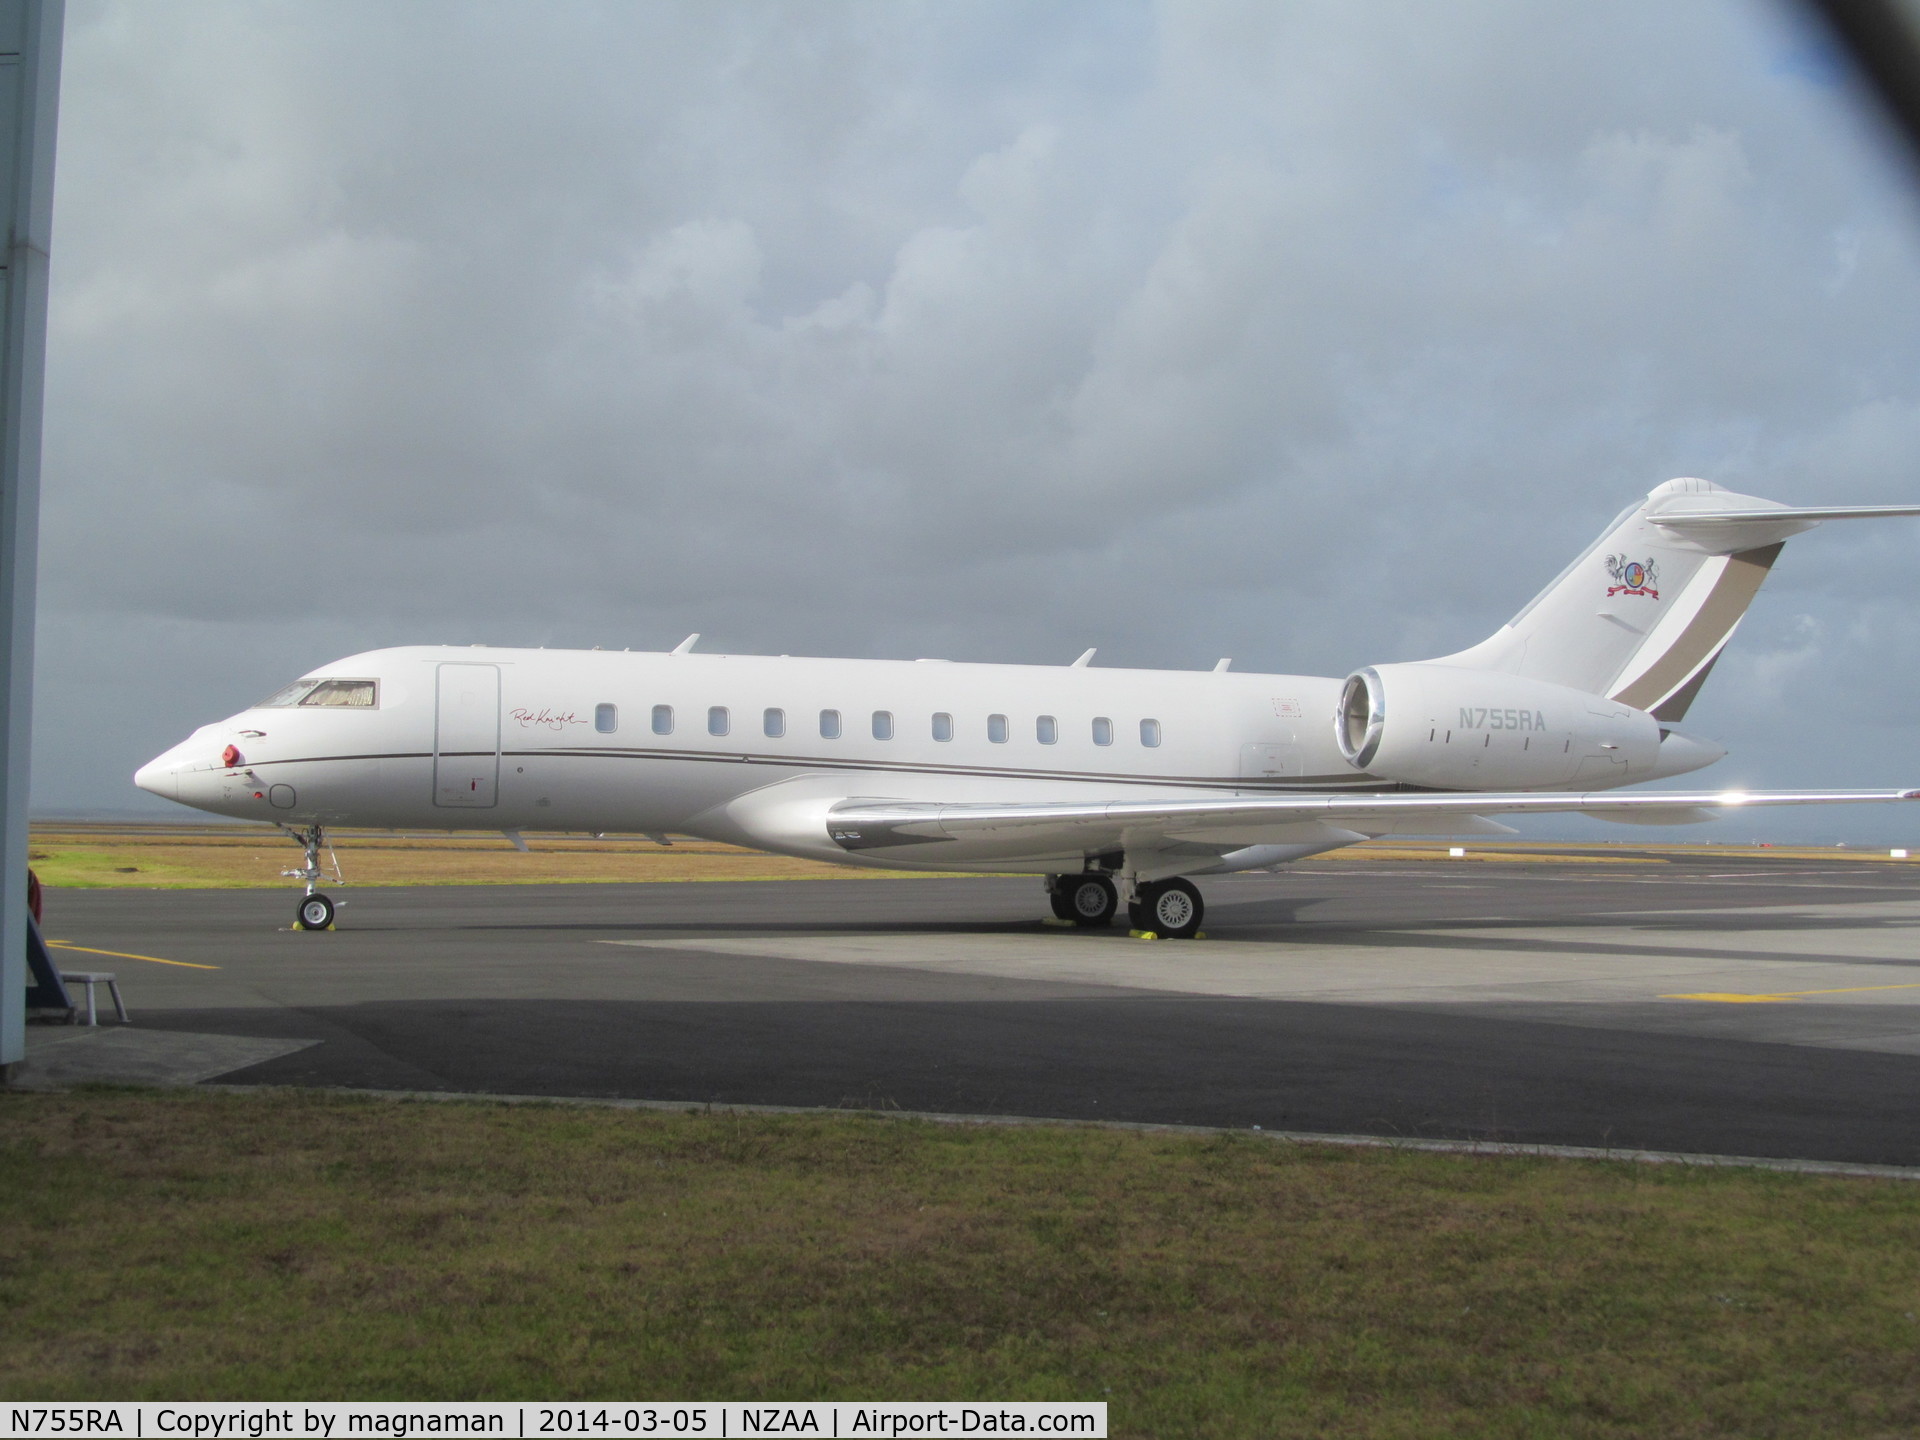 N755RA, 2011 Bombardier BD-700-1A11 Global 5000 C/N 9468, Regular visitor to AKL - but for me first time to get a photo. Bit of a washed out colour scheme :-(